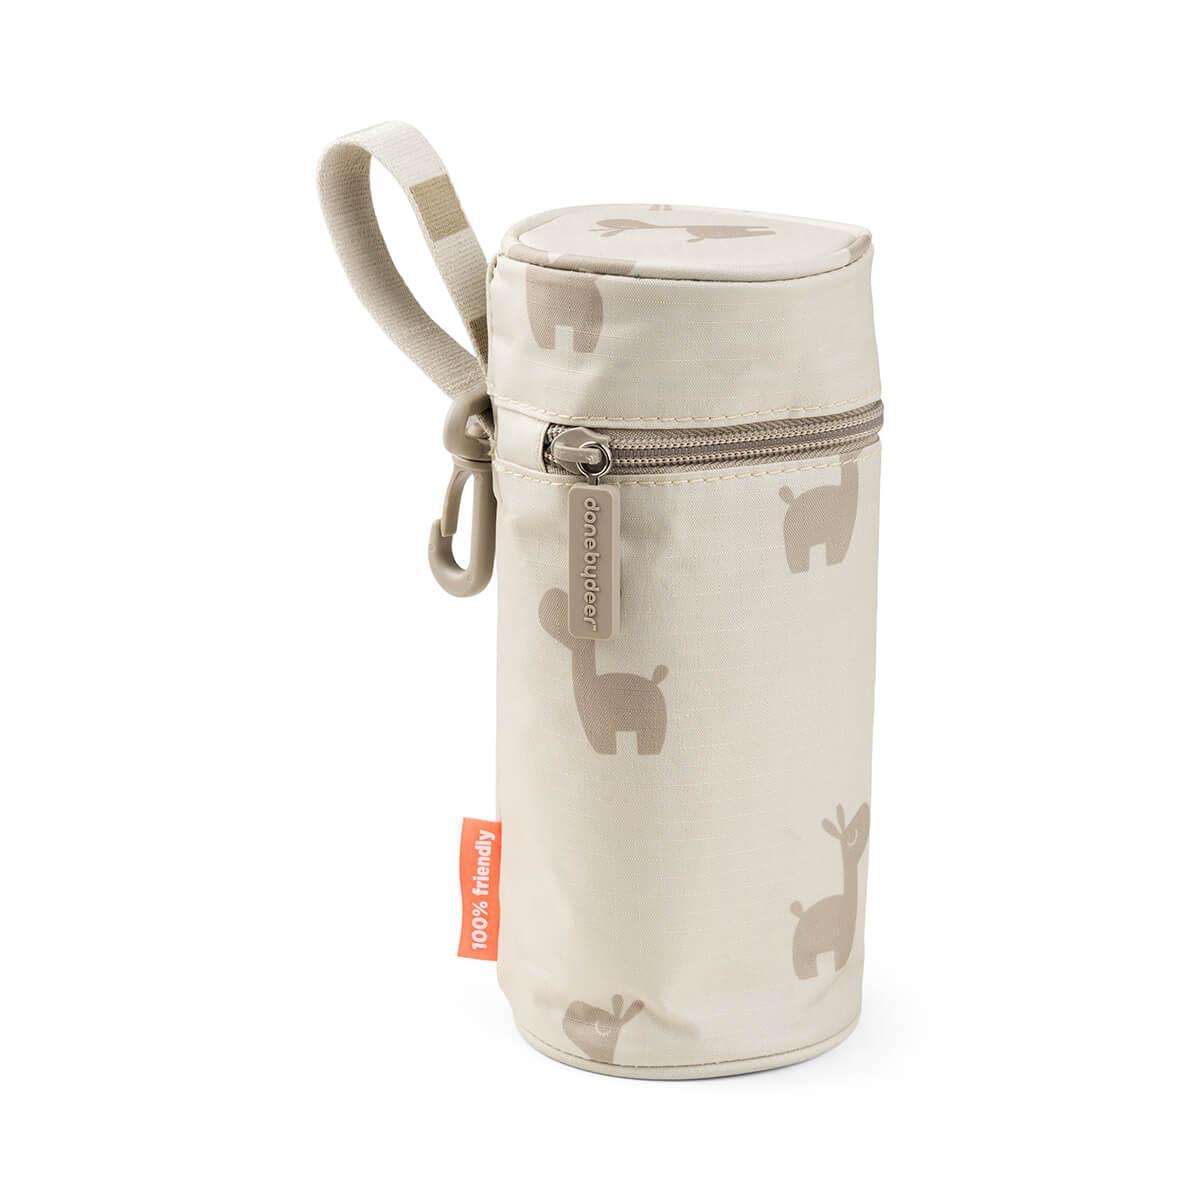 https://www.nordbaby.com/products/images/g130000/130071/bottle-thermos-bags-done-by-deer-sand-done-by-deer-kids-insulated-bottle-holder-lalee-sand-130071-73955.jpg